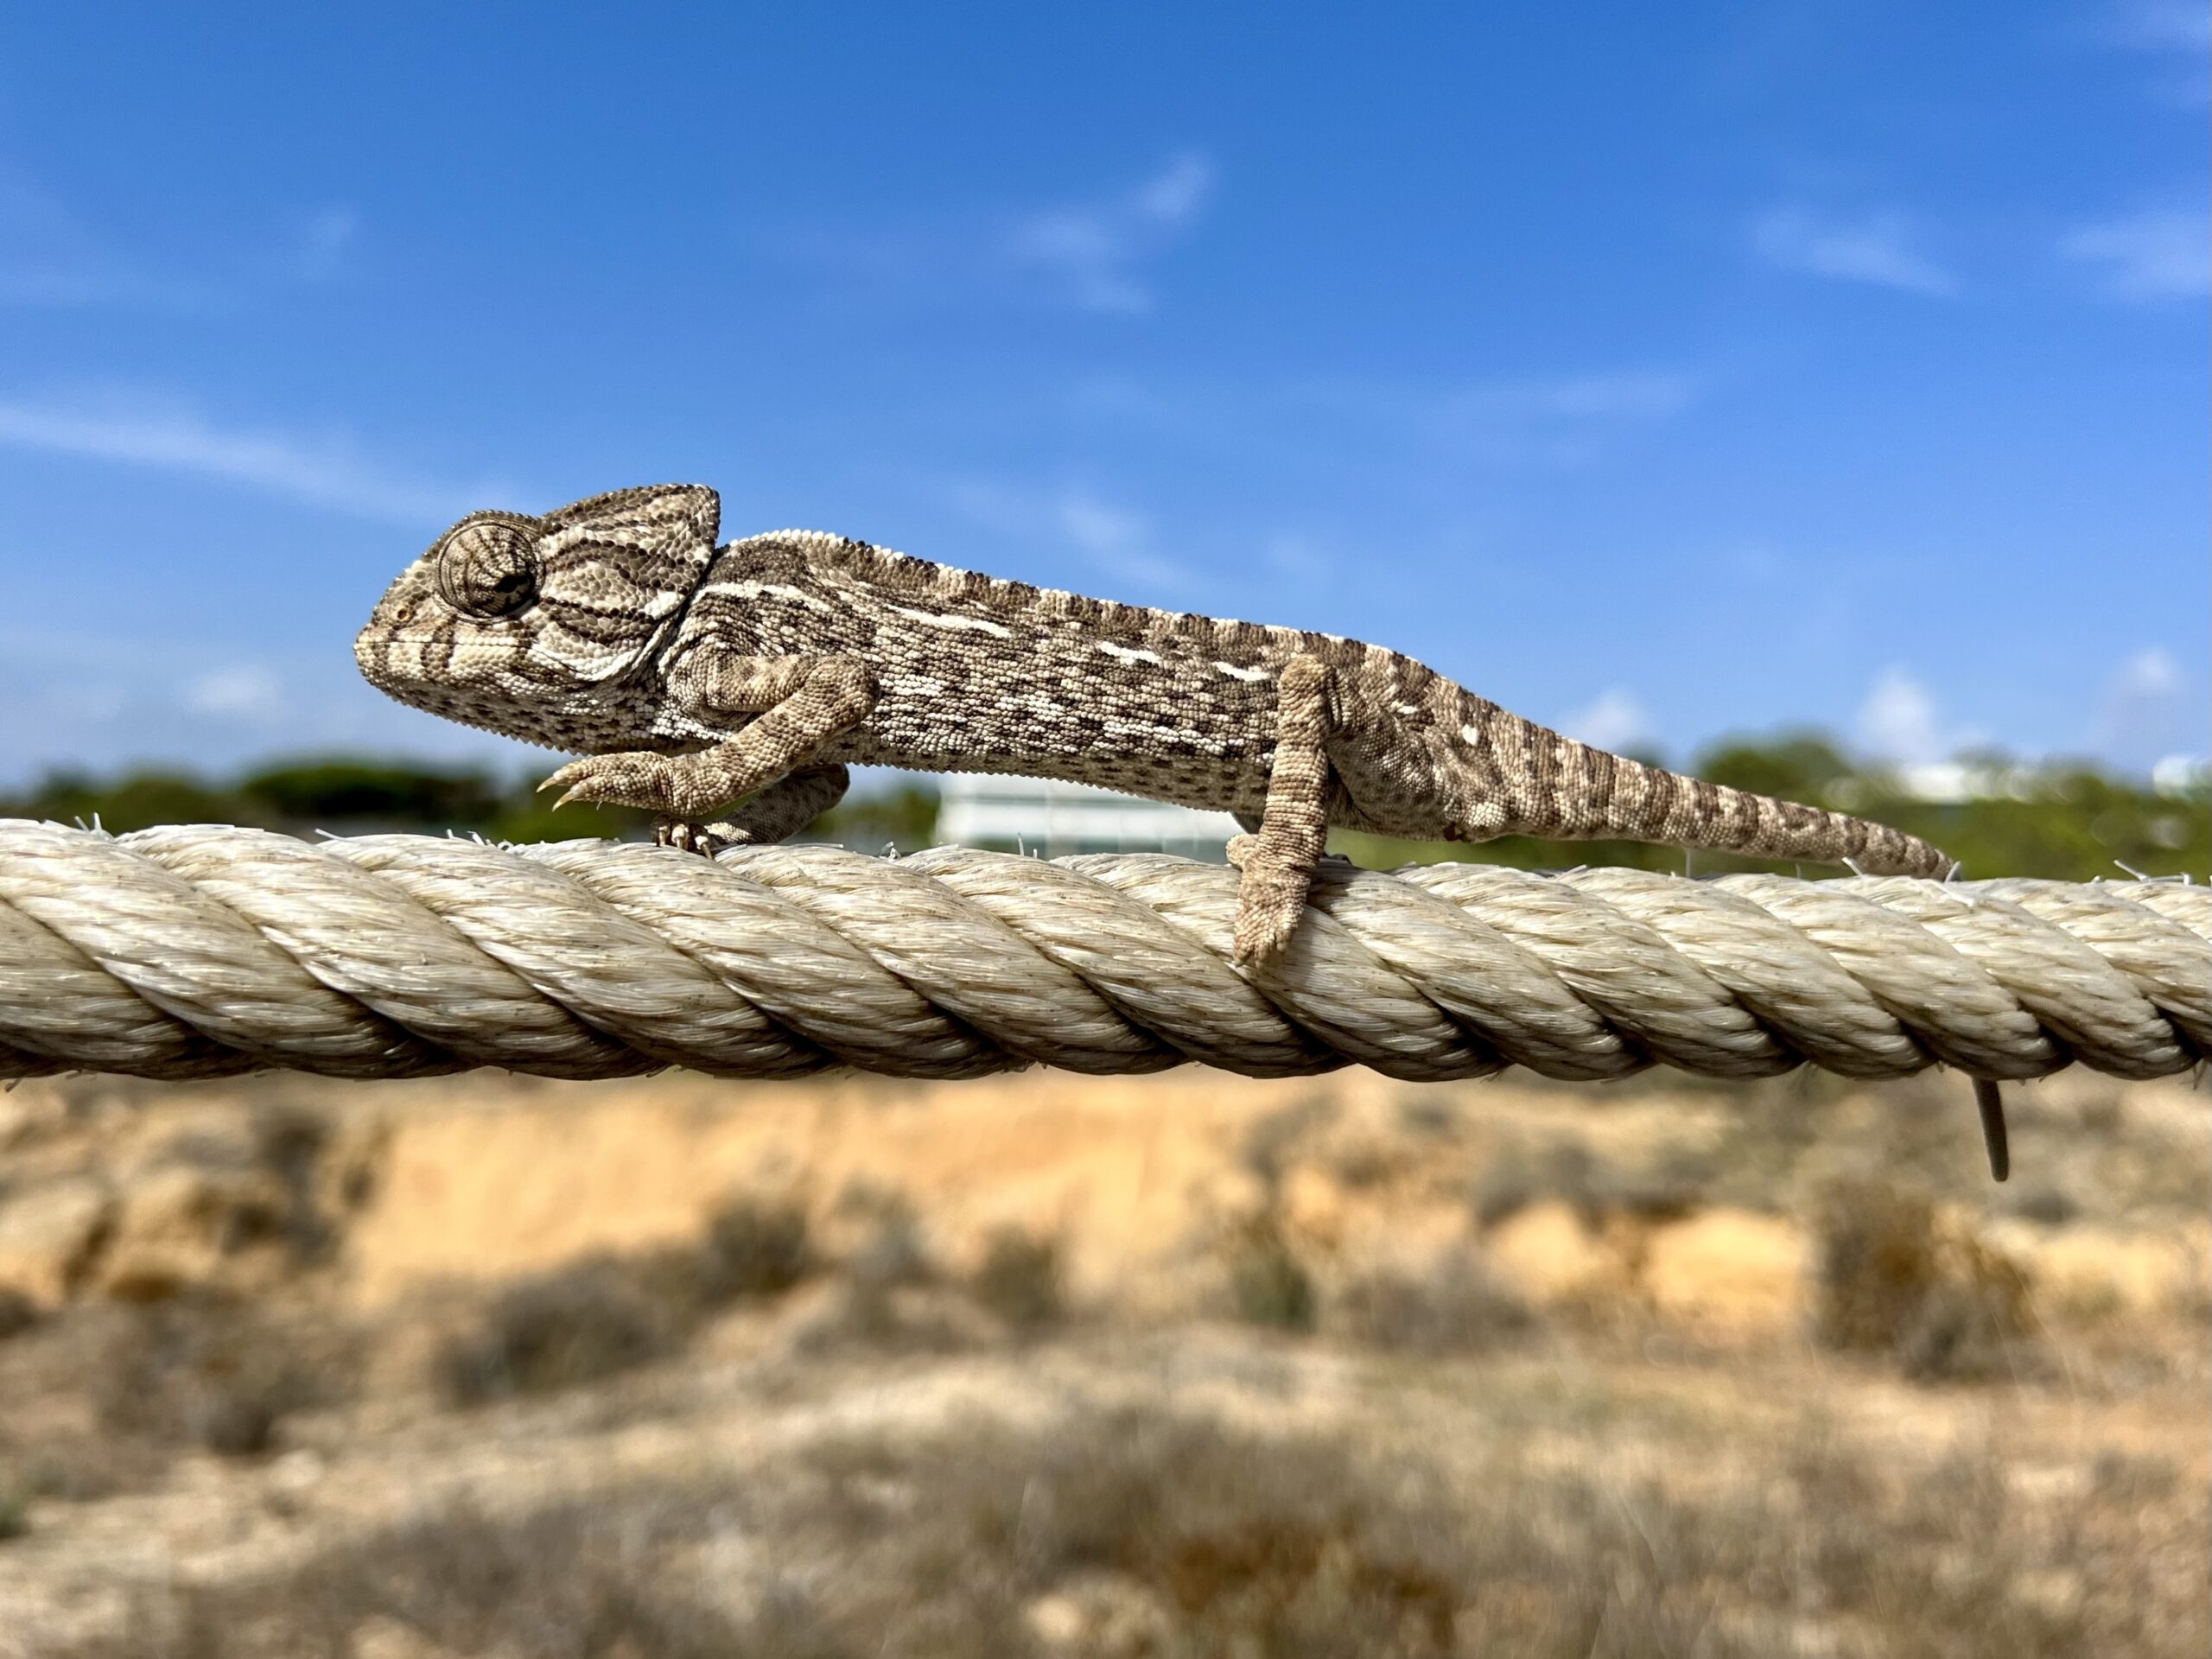 Chameleon perched on the rope of a wooden pathway at Salgados beach